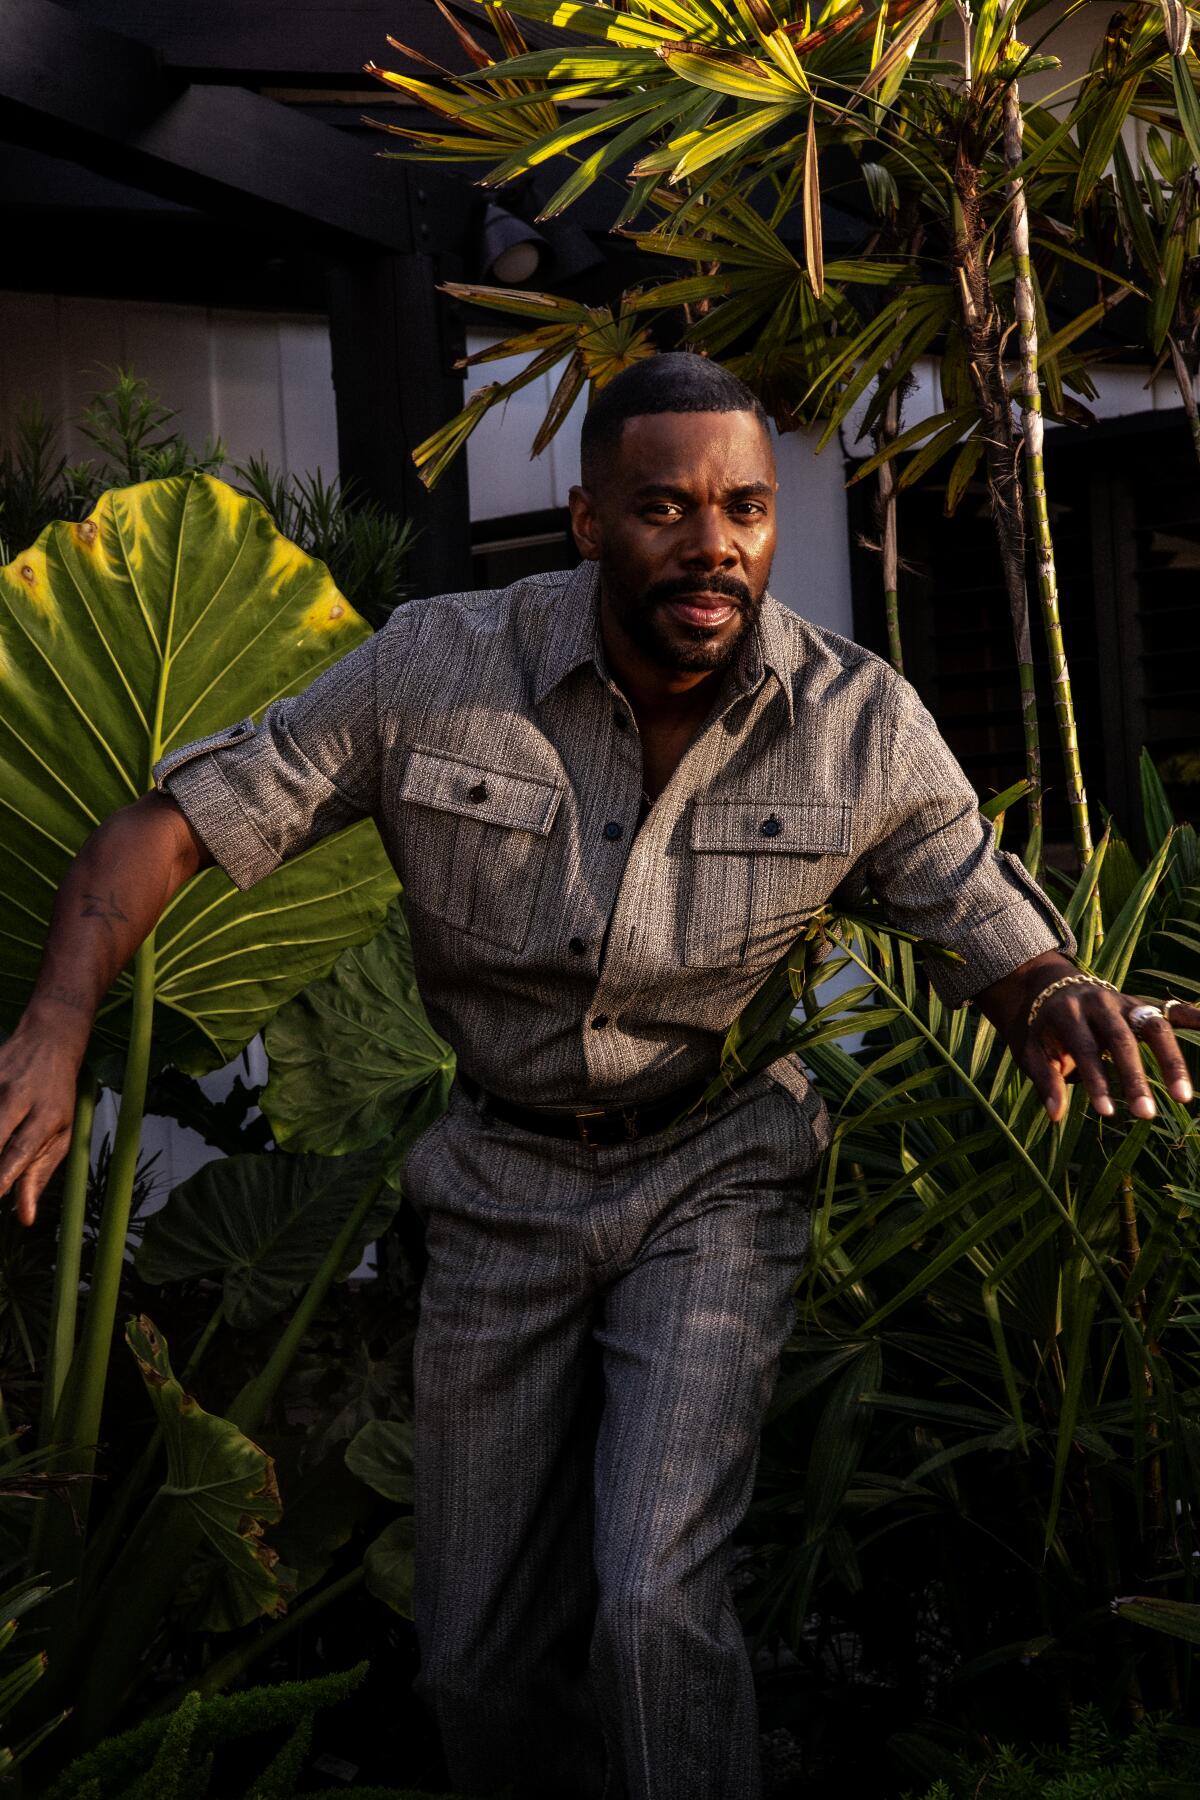 DOWNEY, CA - OCT 26: Colman Domingo is photographed in Downey, CA on October 26, 2023. (Maya Iman / For The Times)